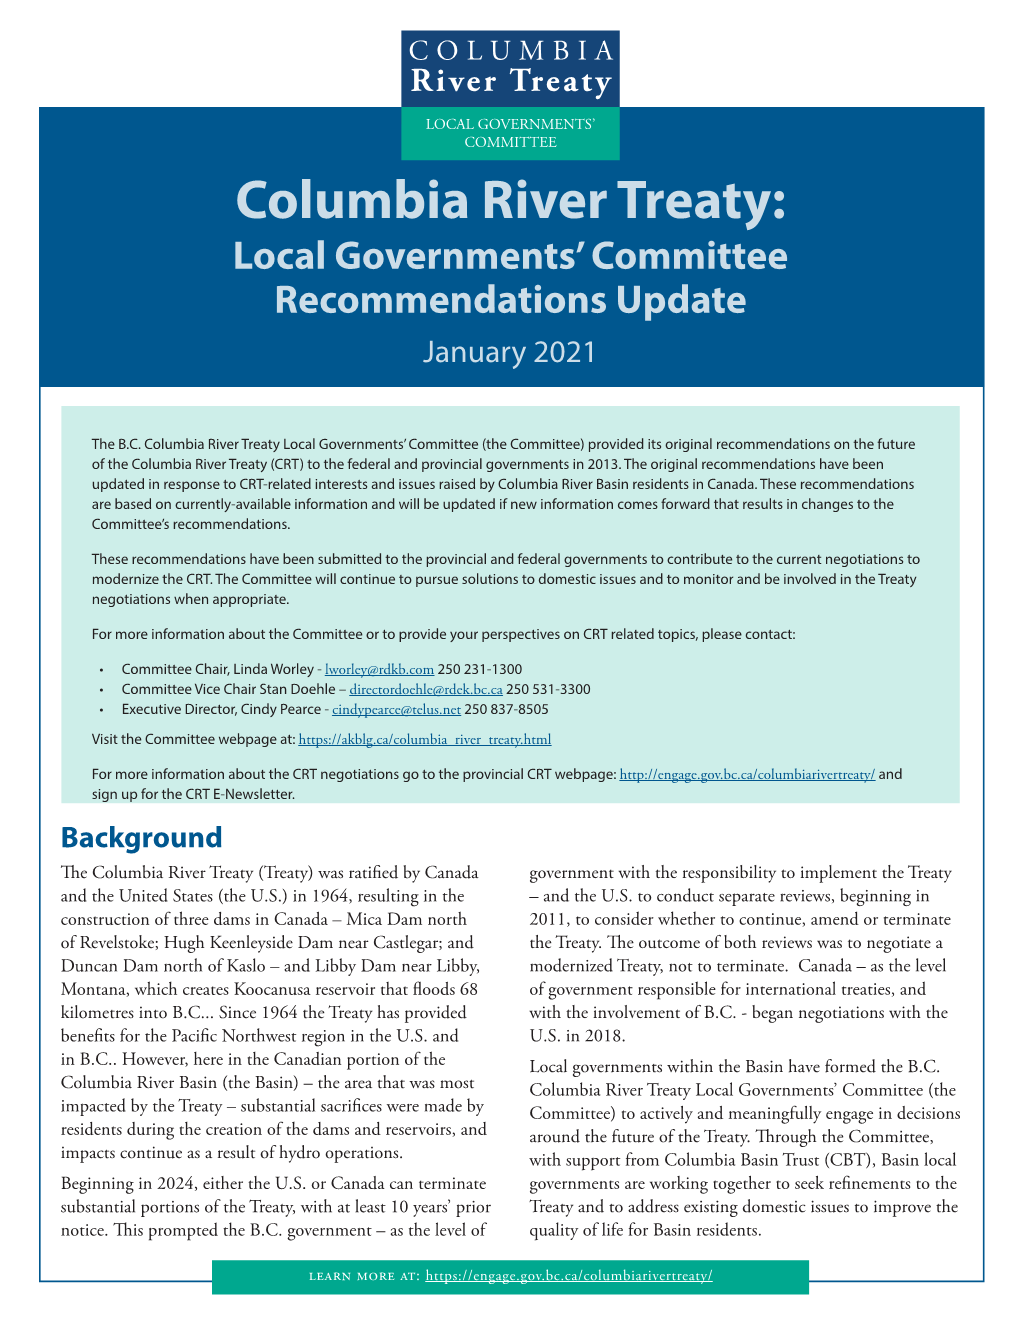 Columbia River Treaty: Local Governments’ Committee Recommendations Update January 2021